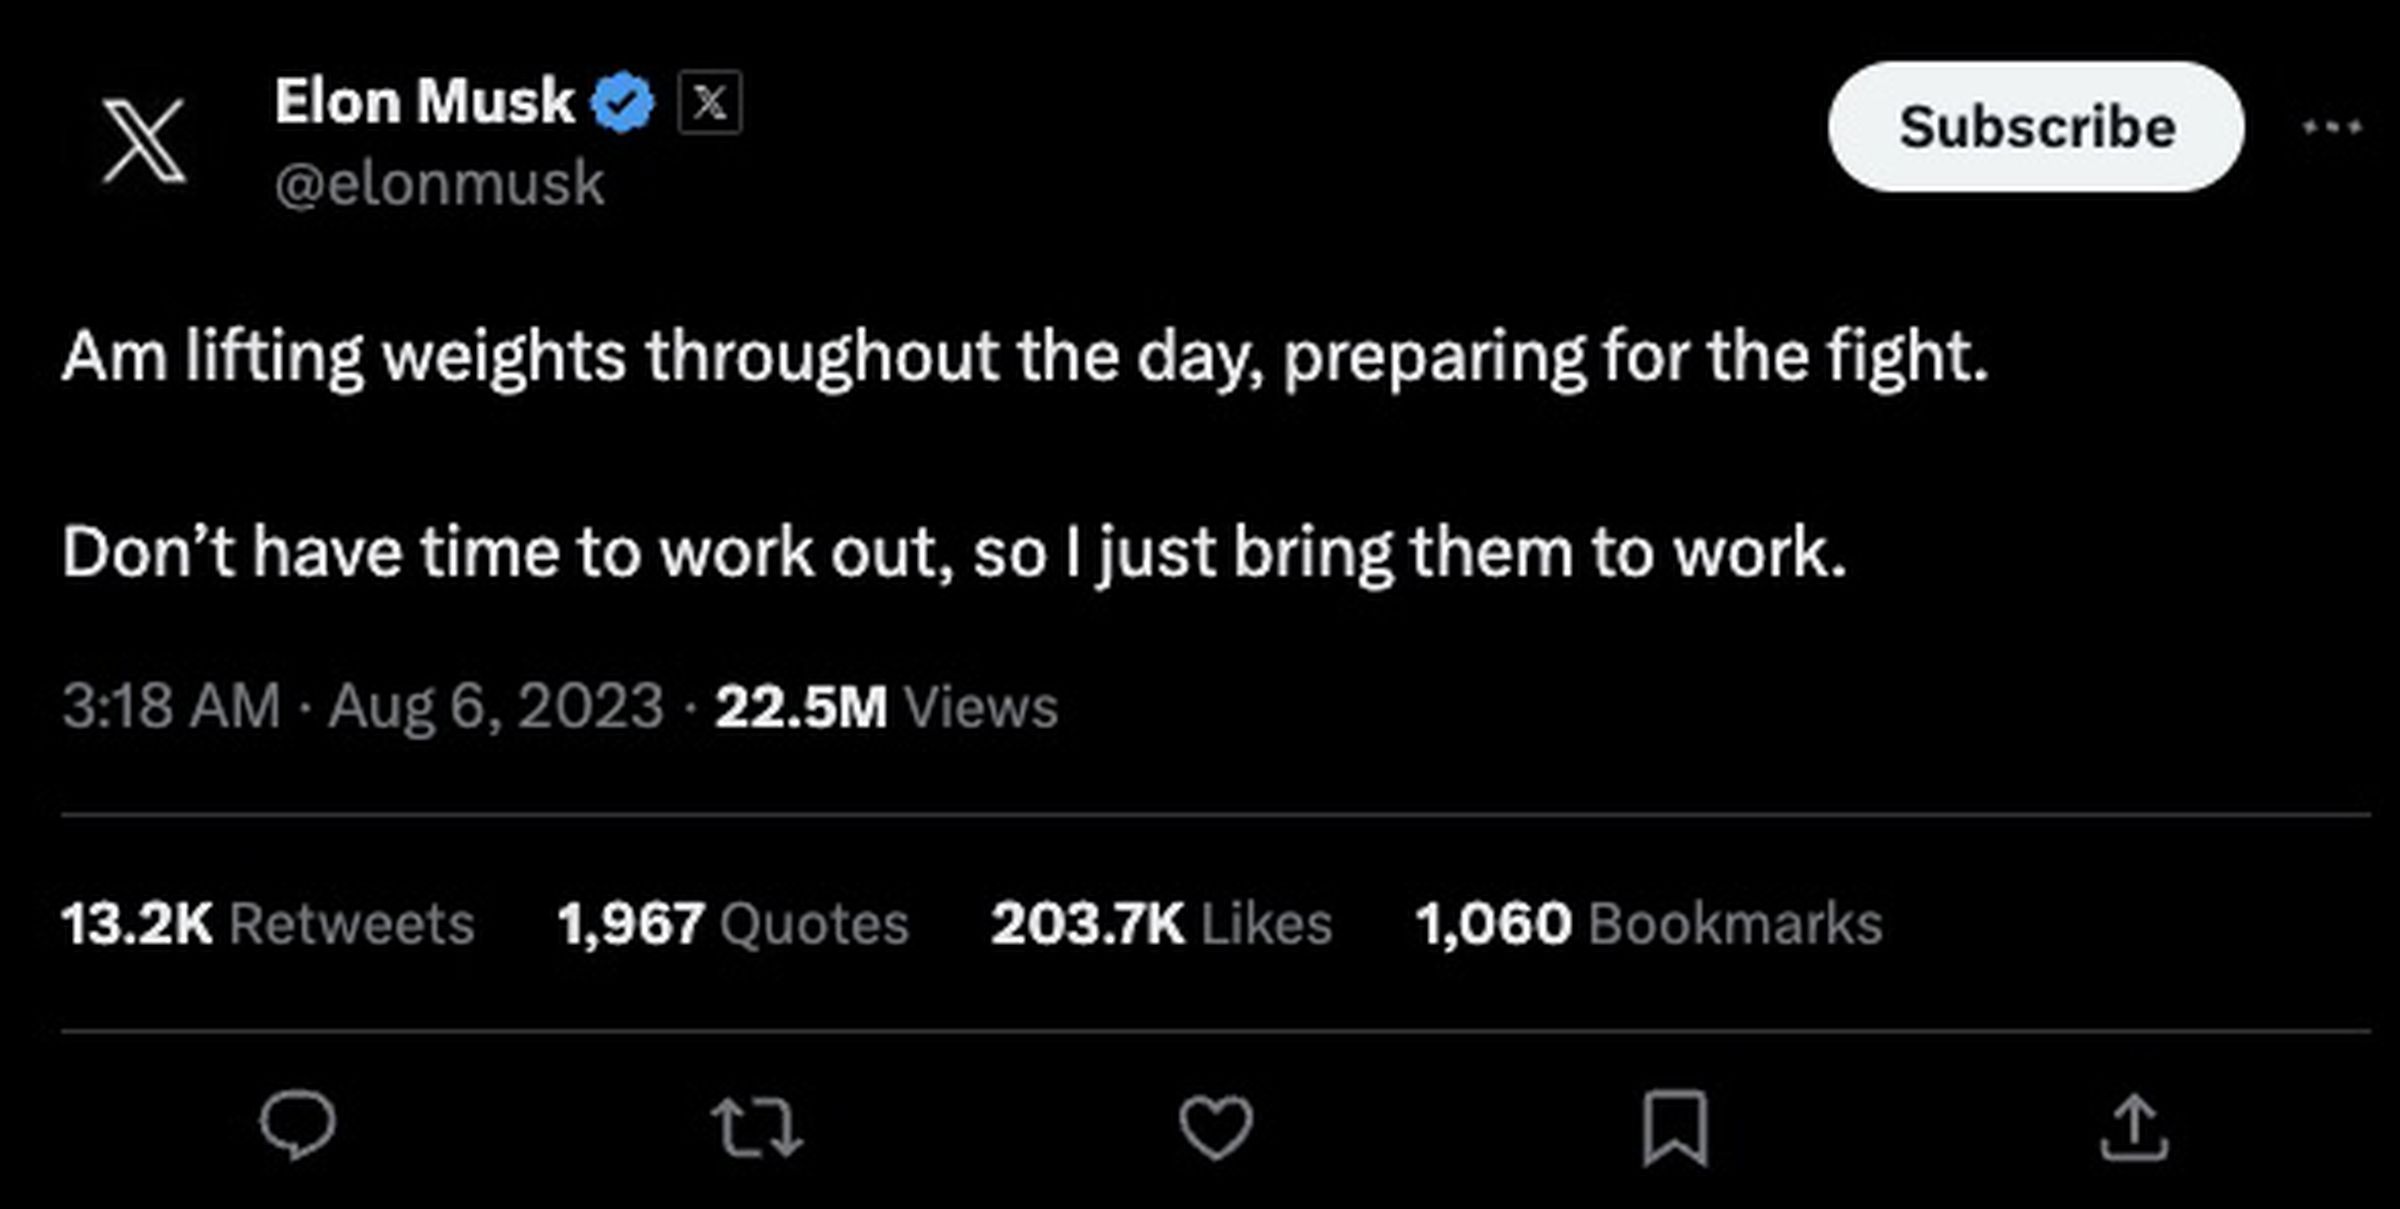 Elon Musk: “Am lifting weights throughout the day, preparing for the fight.   Don’t have time to work out, so I just bring them to work.”